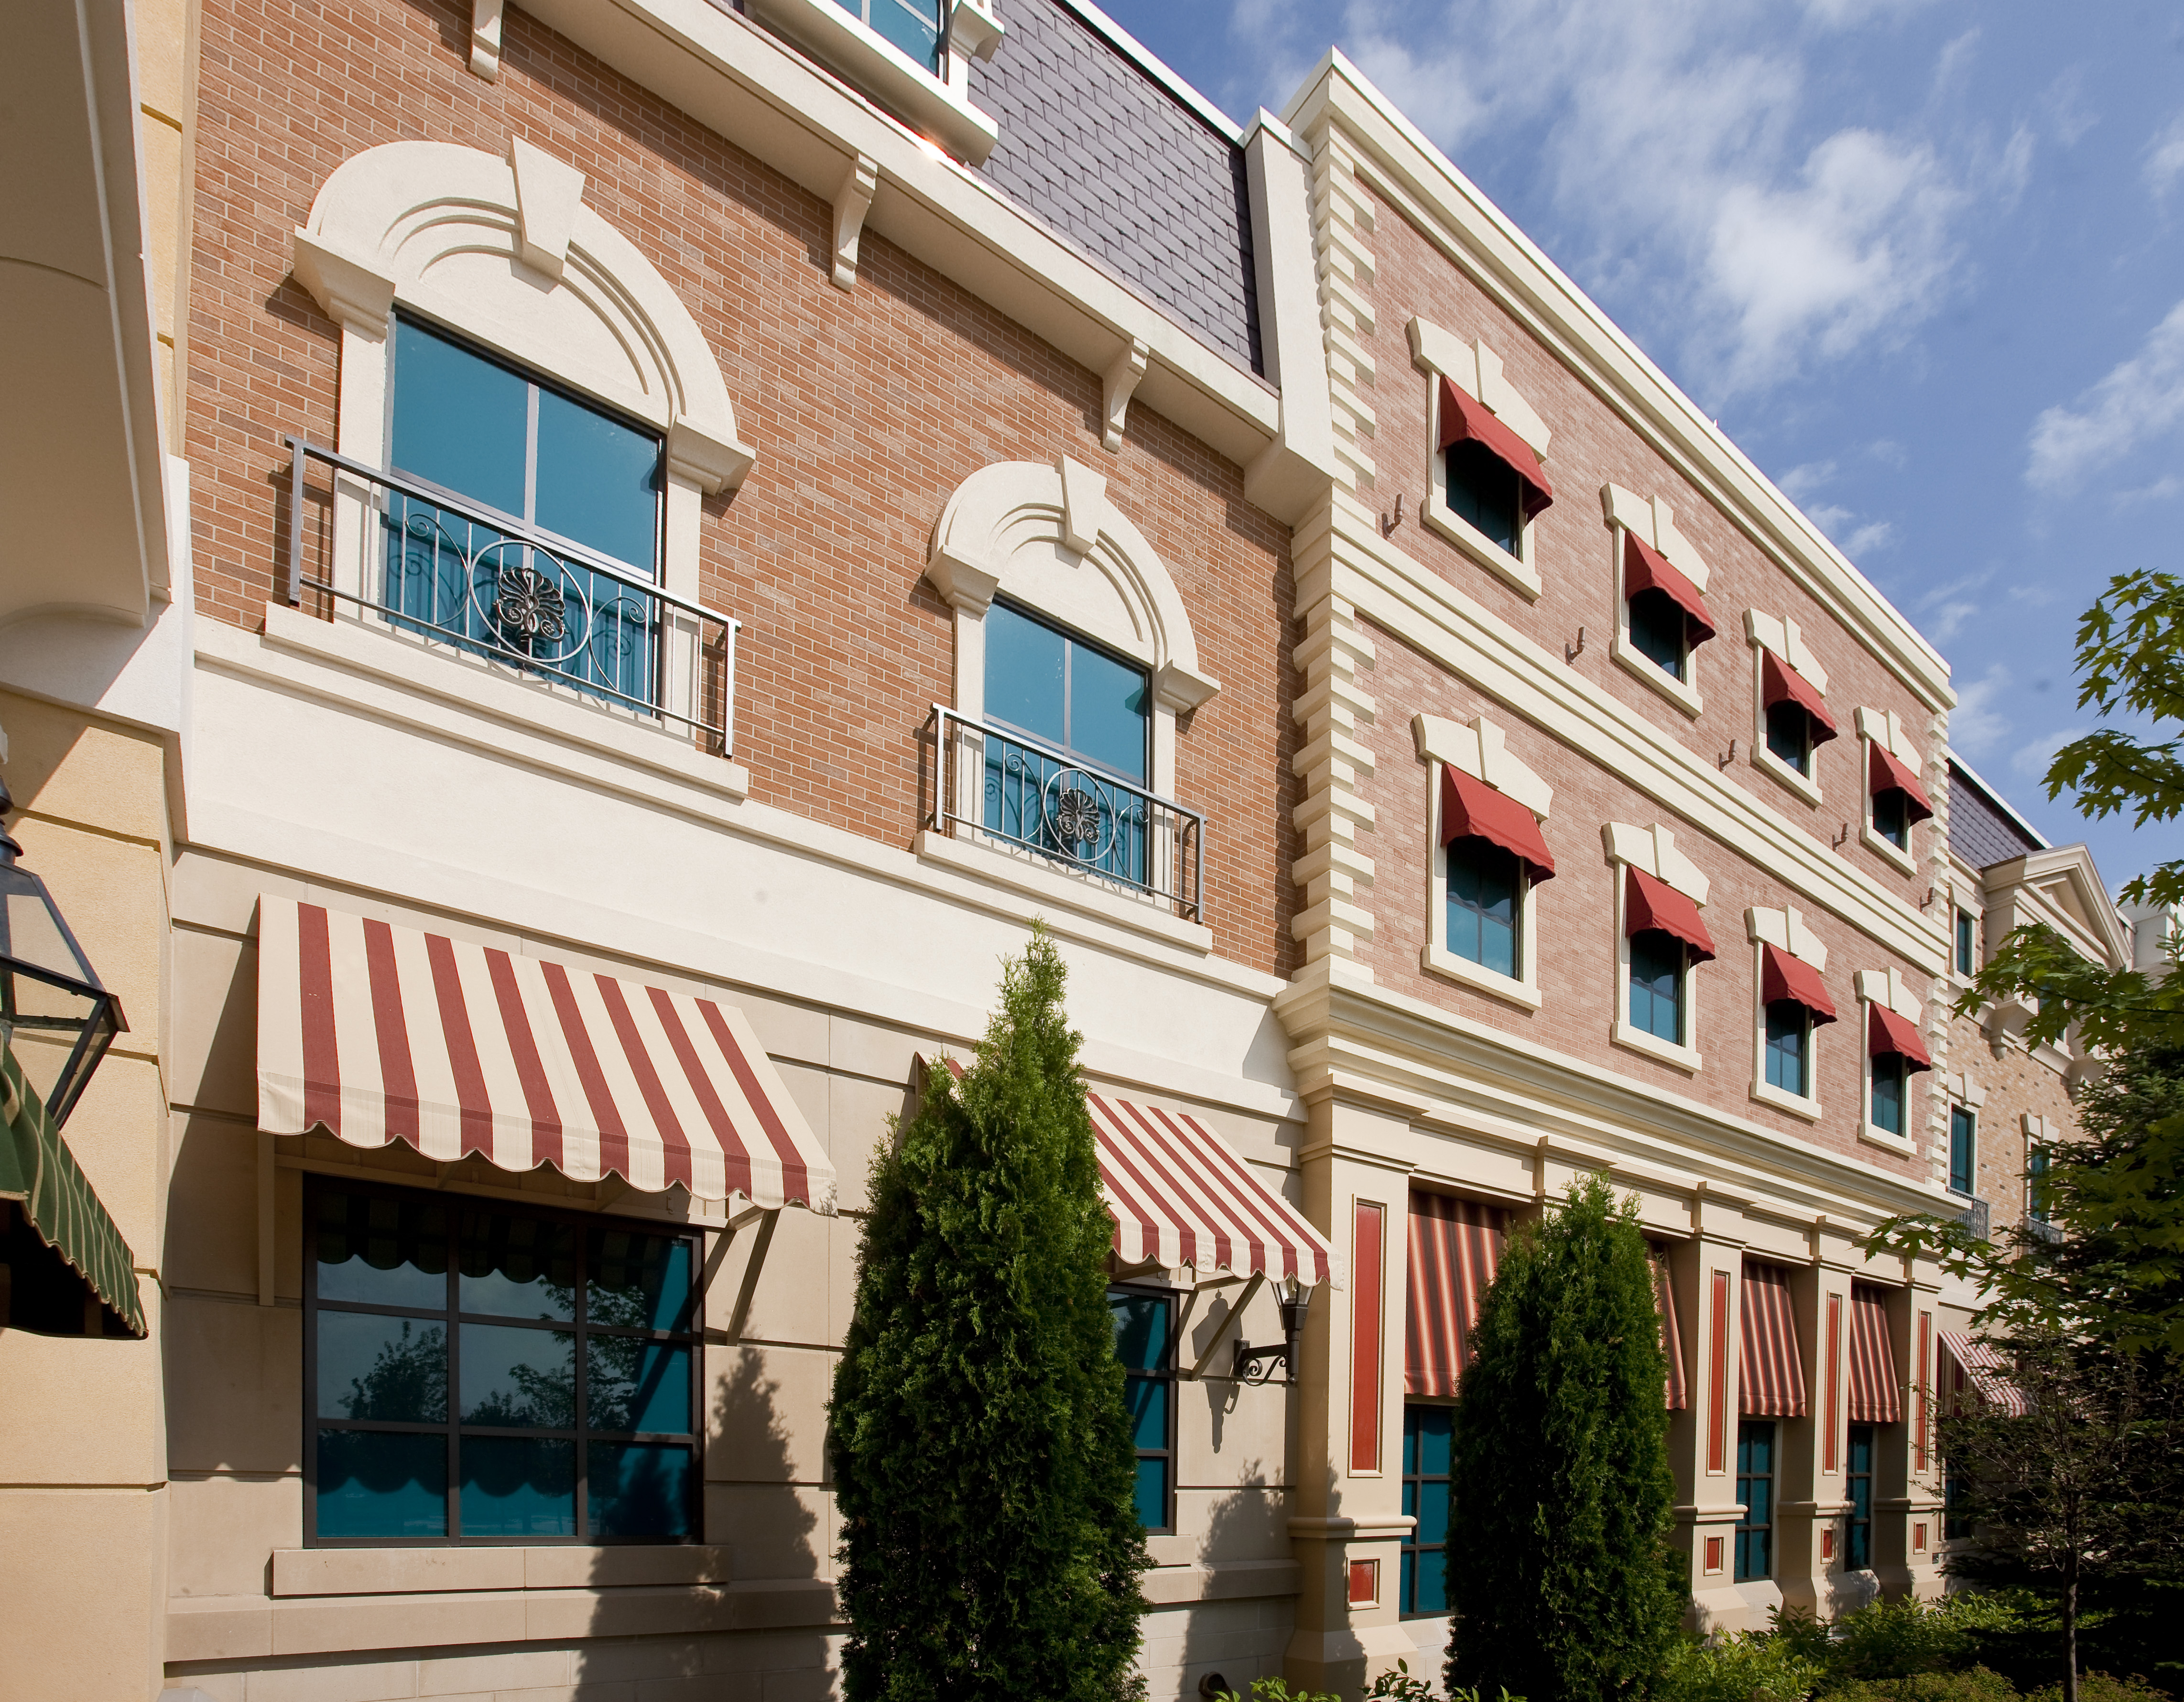 Exterior Insulation And Finishing Systems (EIFS)